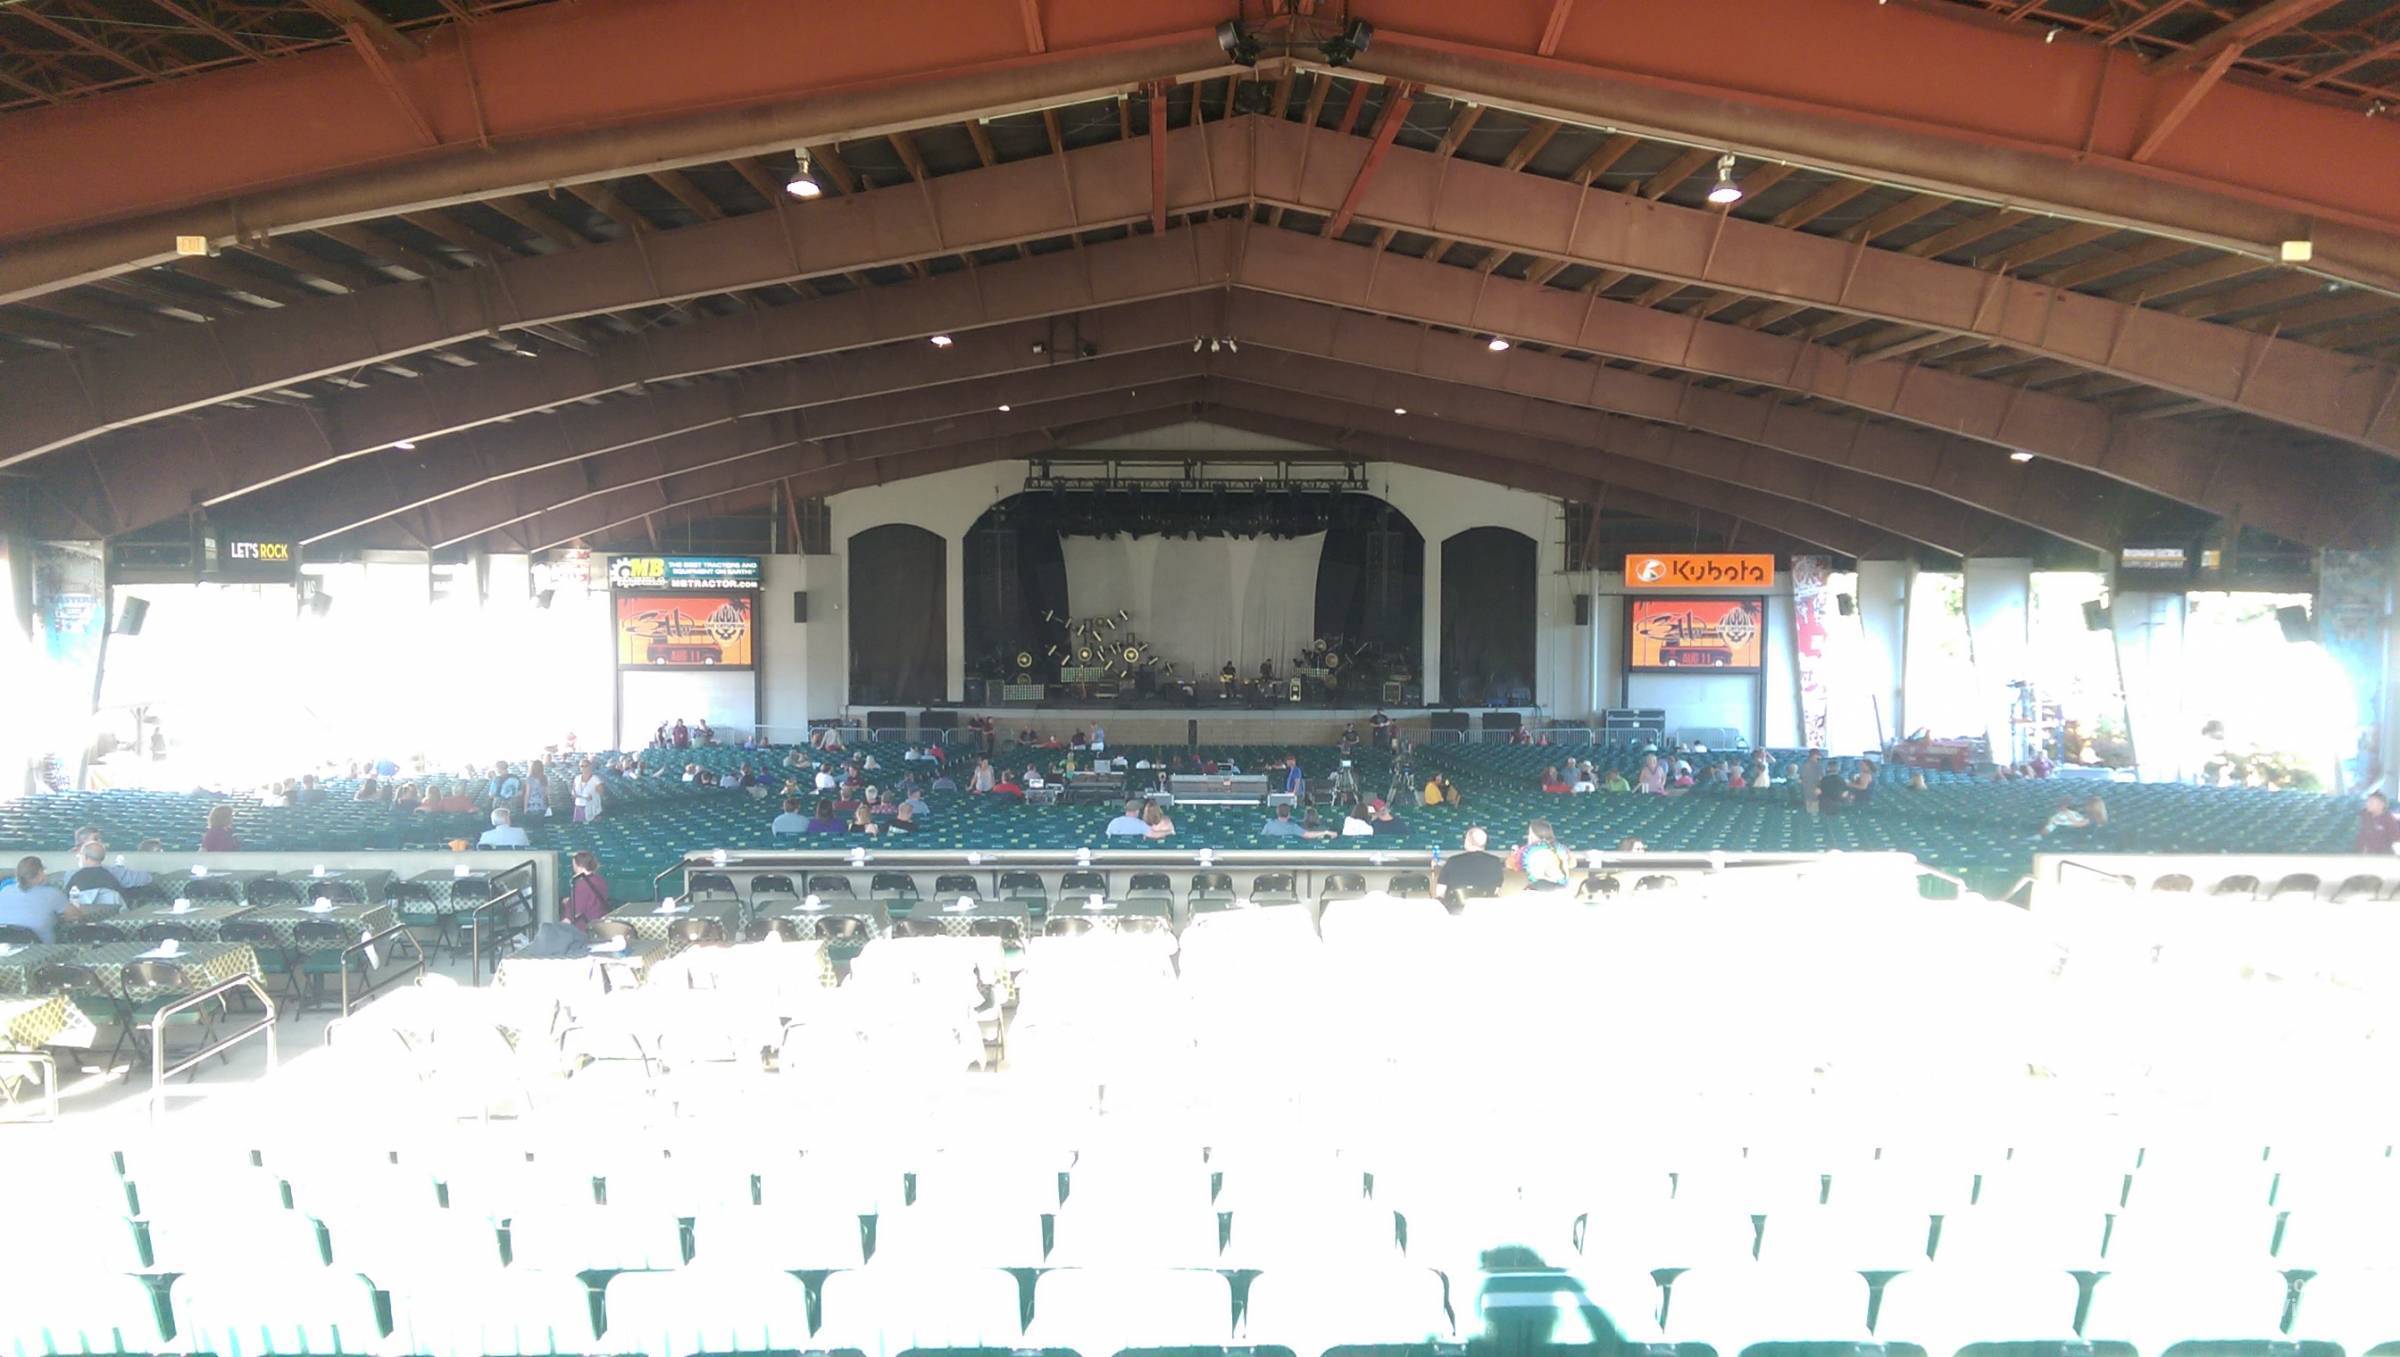 section 3c, row 10 seat view  - bank of new hampshire pavilion